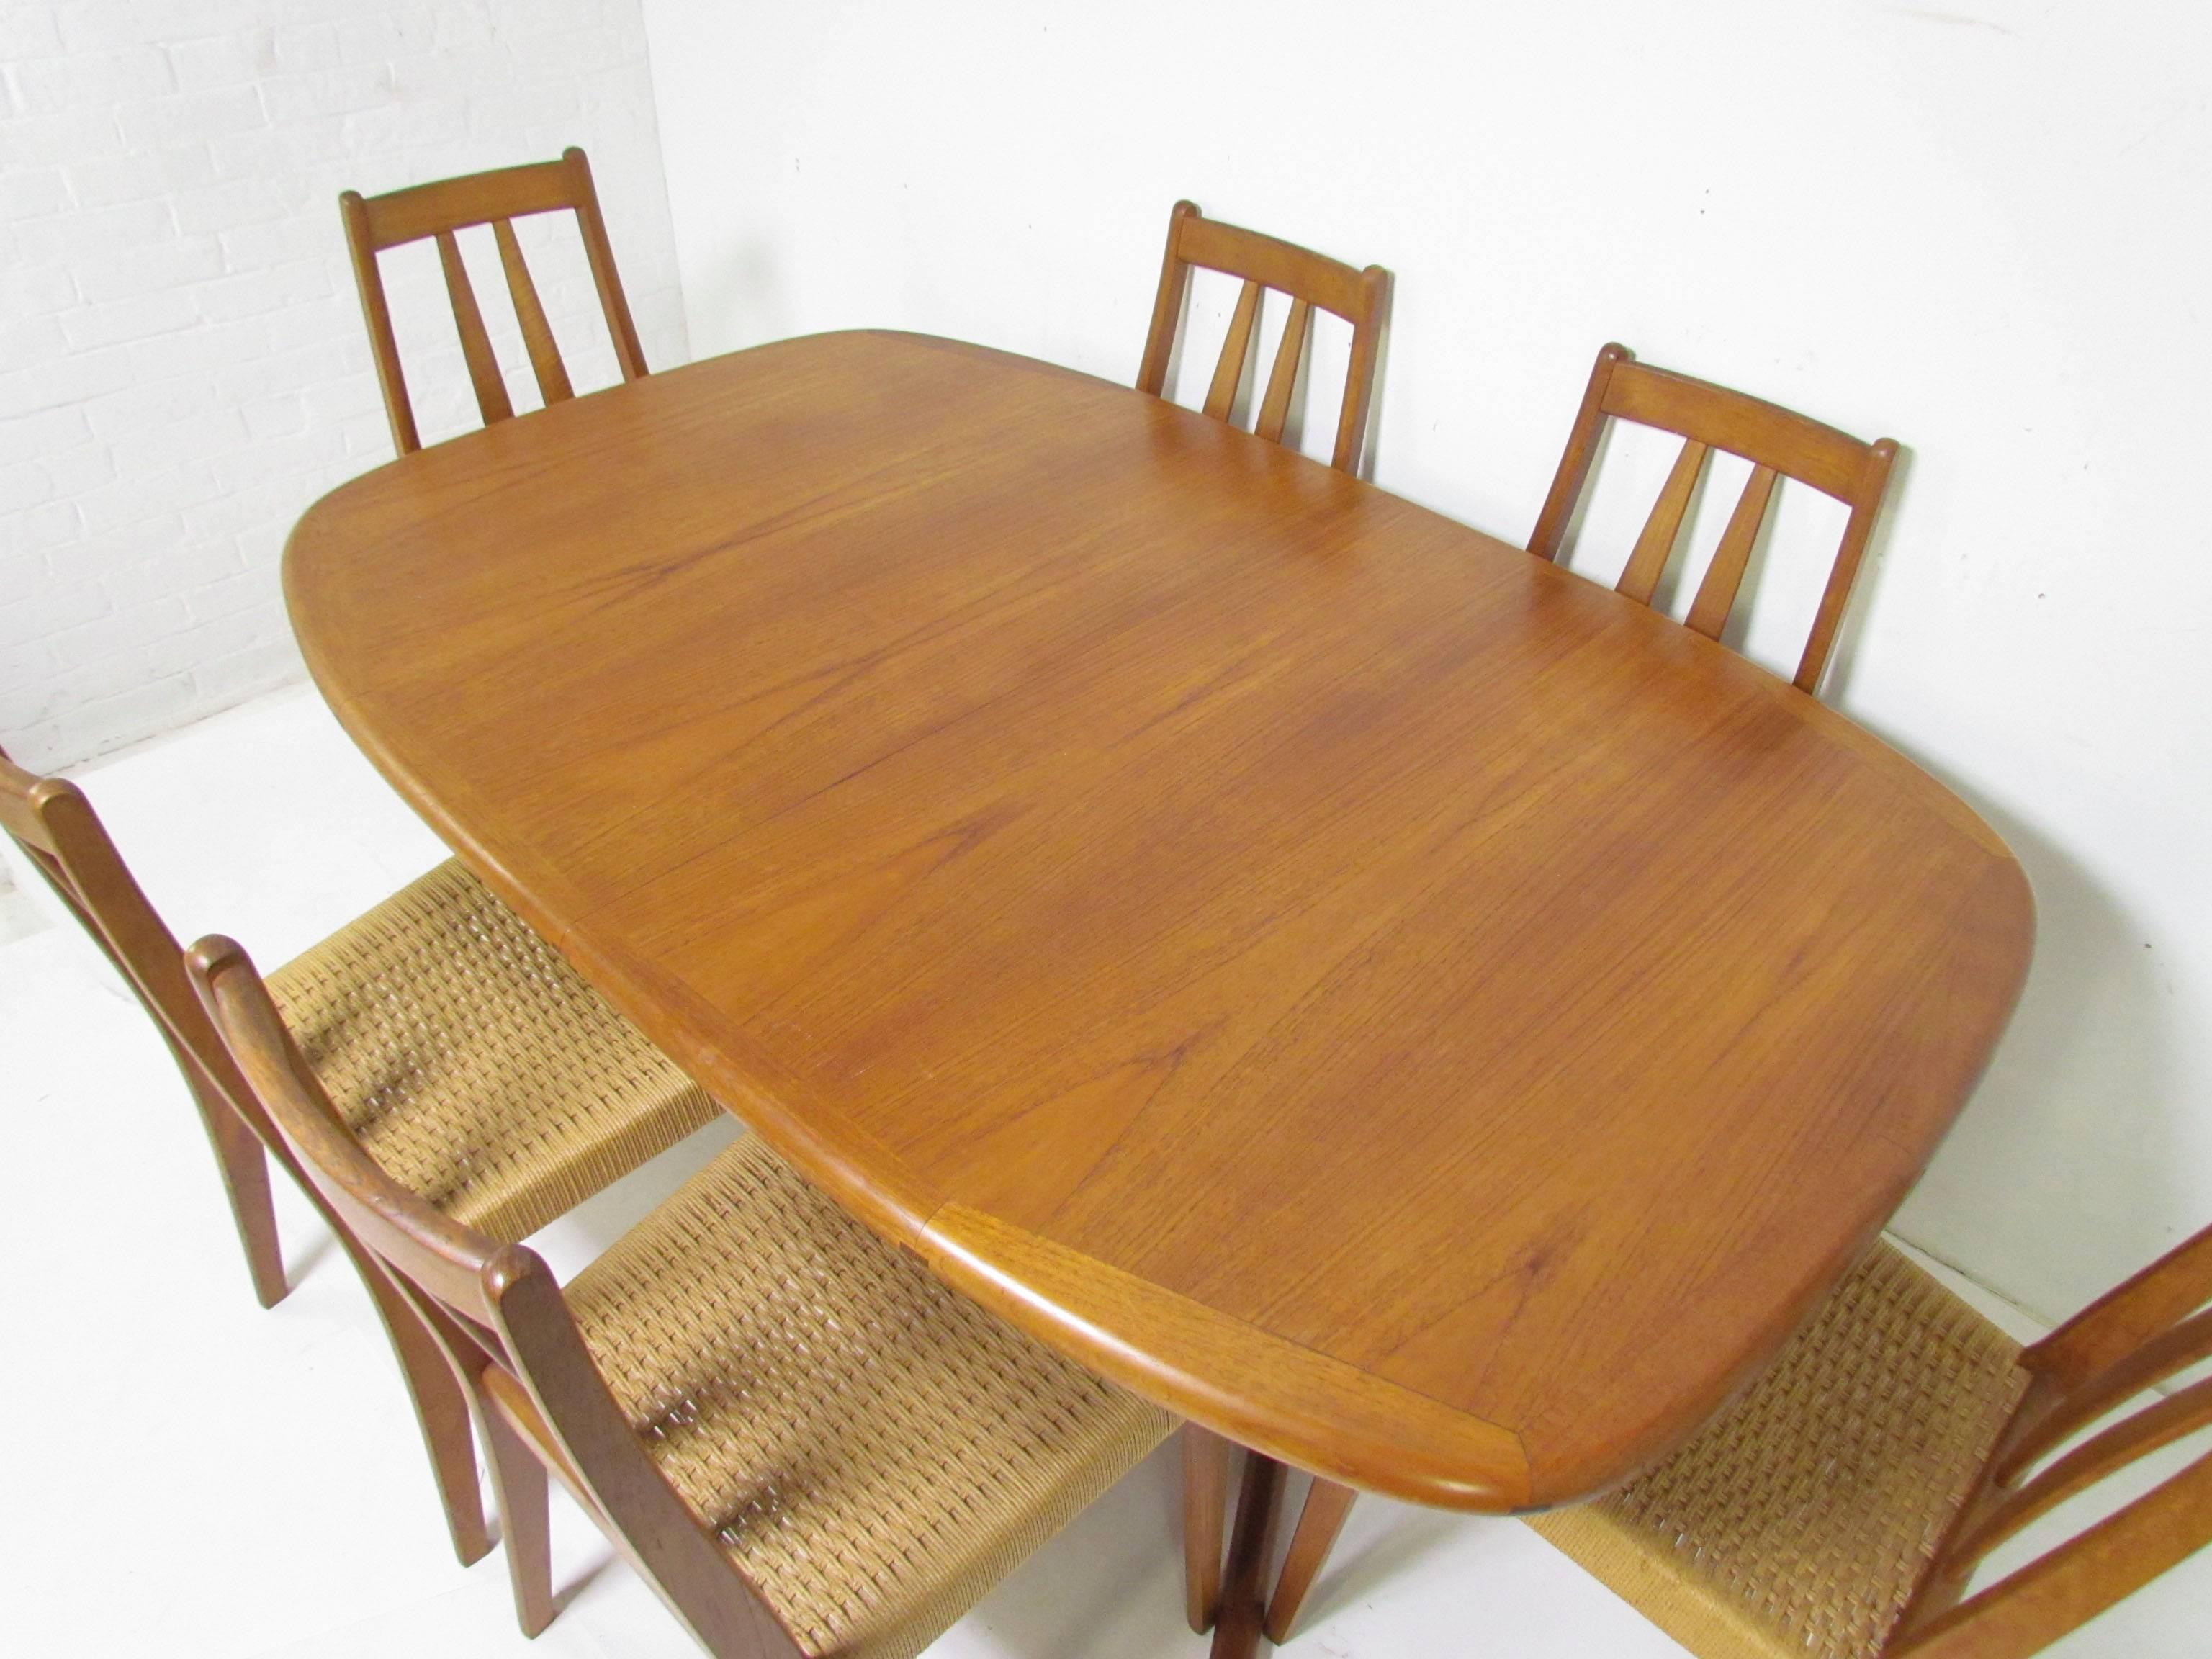 Mid-Century oval dining table in teak by Dyrlund, Denmark, with six high back teak dining chairs with original woven cord seats. Table includes two extension leaves that can be stored inside the table.

Table measures 104